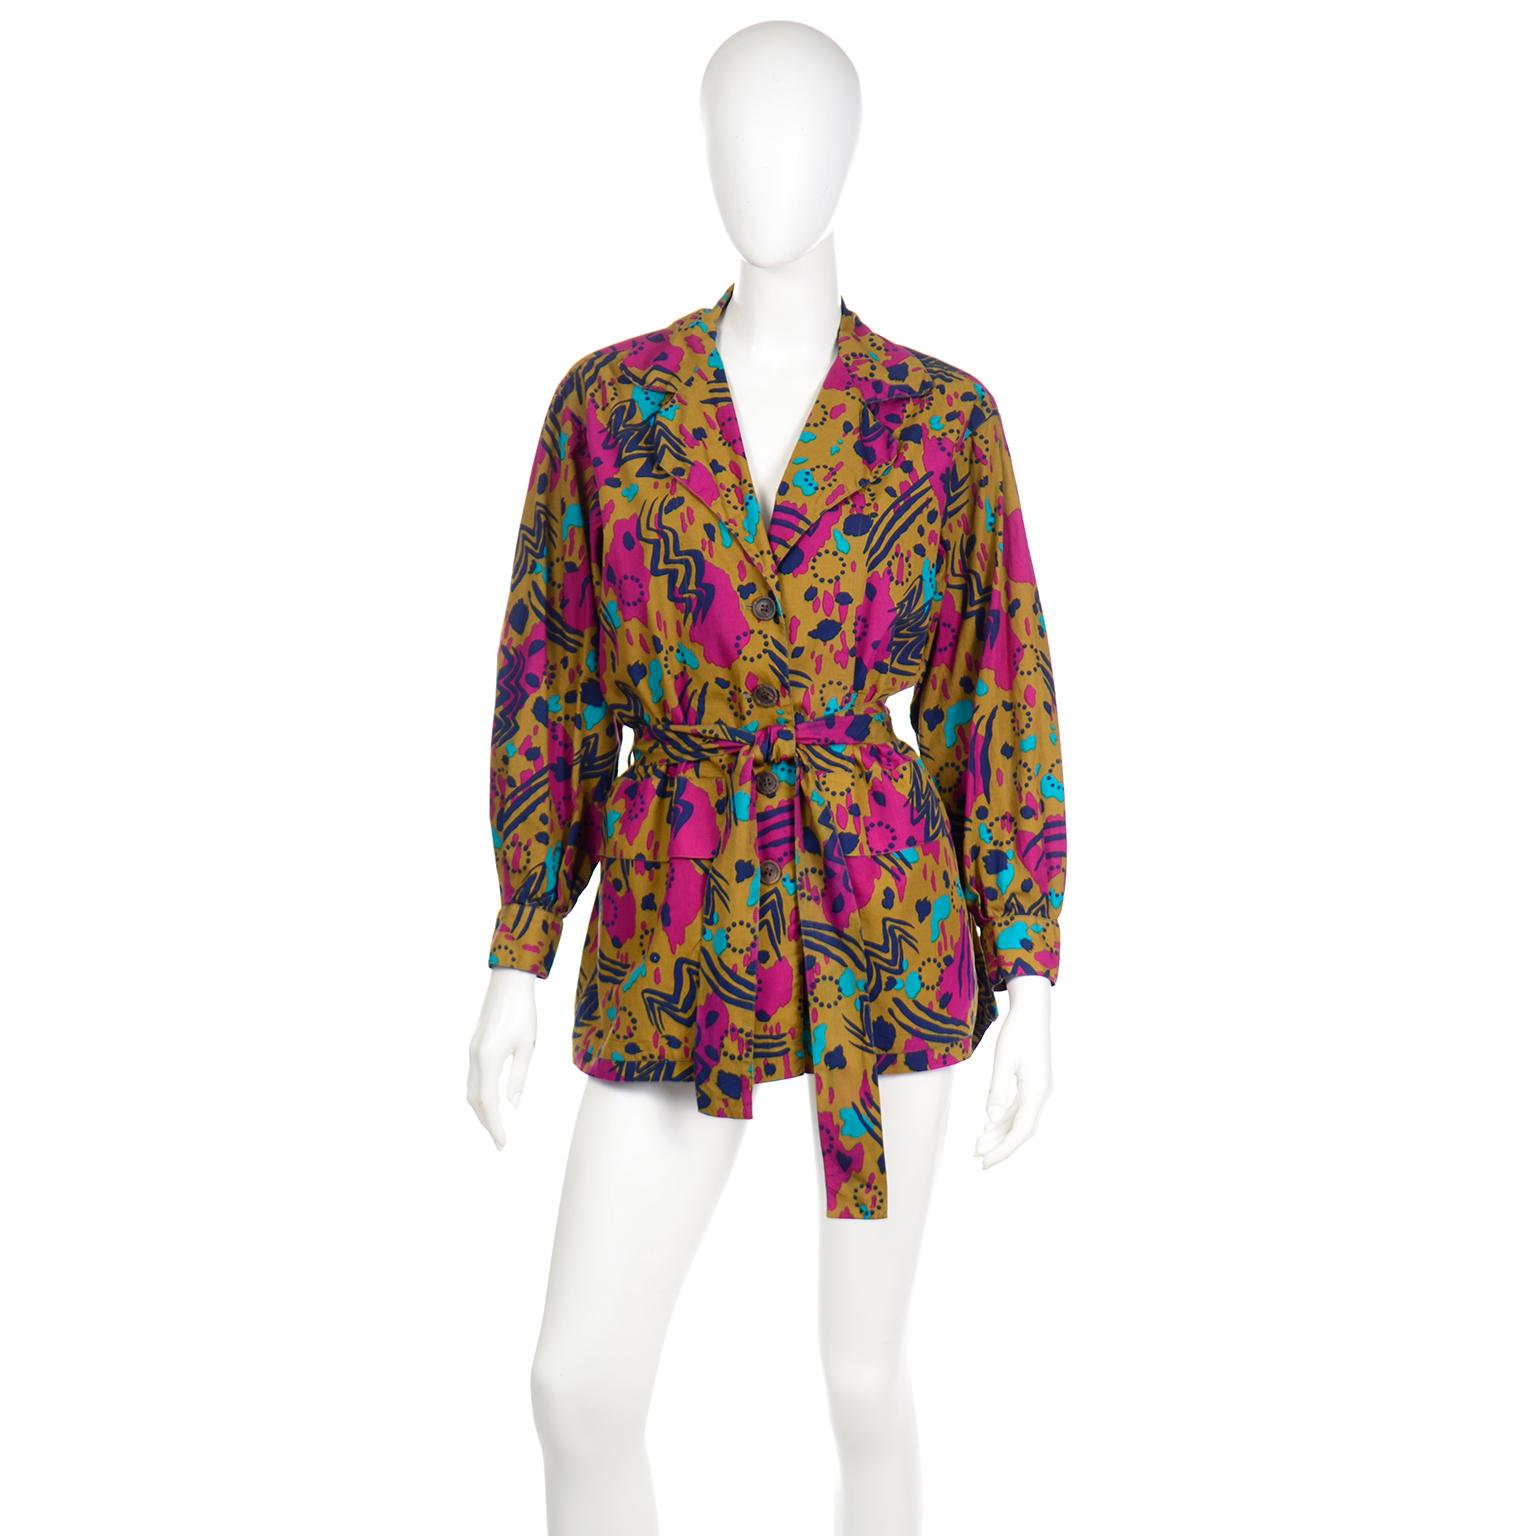 This fabulous vintage YSL  jacket style shirt with front patch pockets  is a perfect example of Saint Laurent's talent! The top is in an almost olive green but with a bit more of a yellow tinge to the hue, with an abstract magenta pink, turquoise